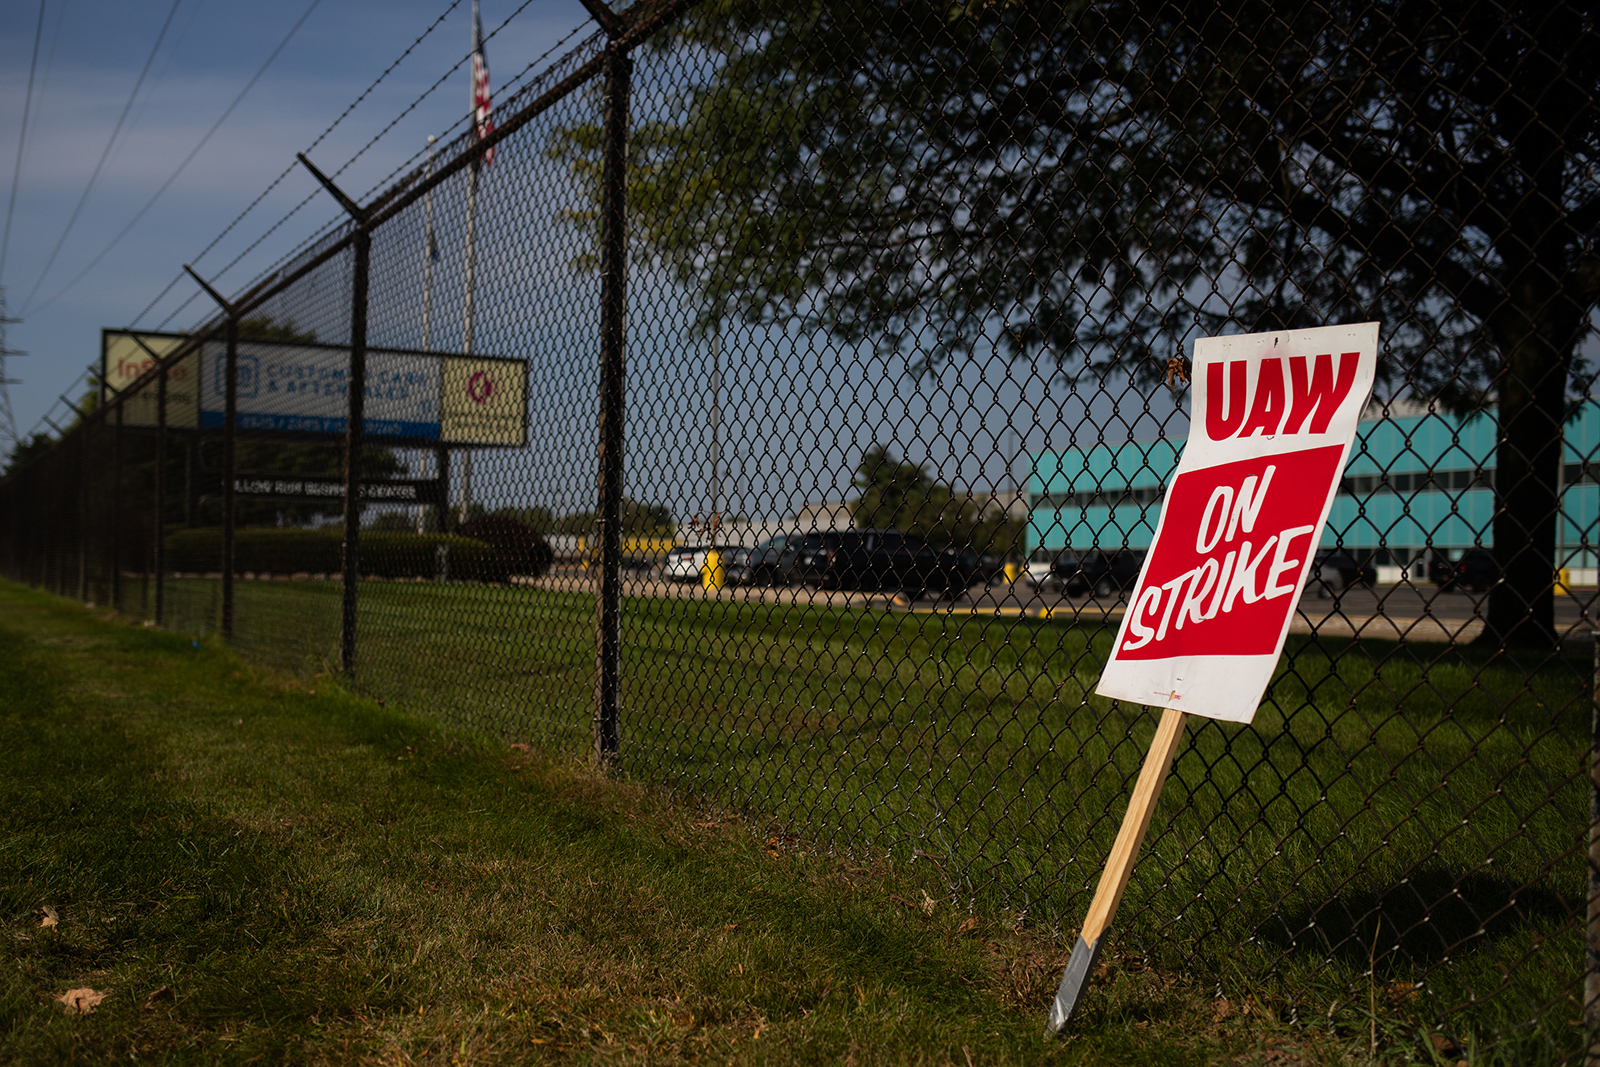 A "UAW On Strike" sign near a picket line outside the General Motors Co. Ypsilanti Processing Center in Ypsilanti, Michigan, on Friday, Sept. 22.